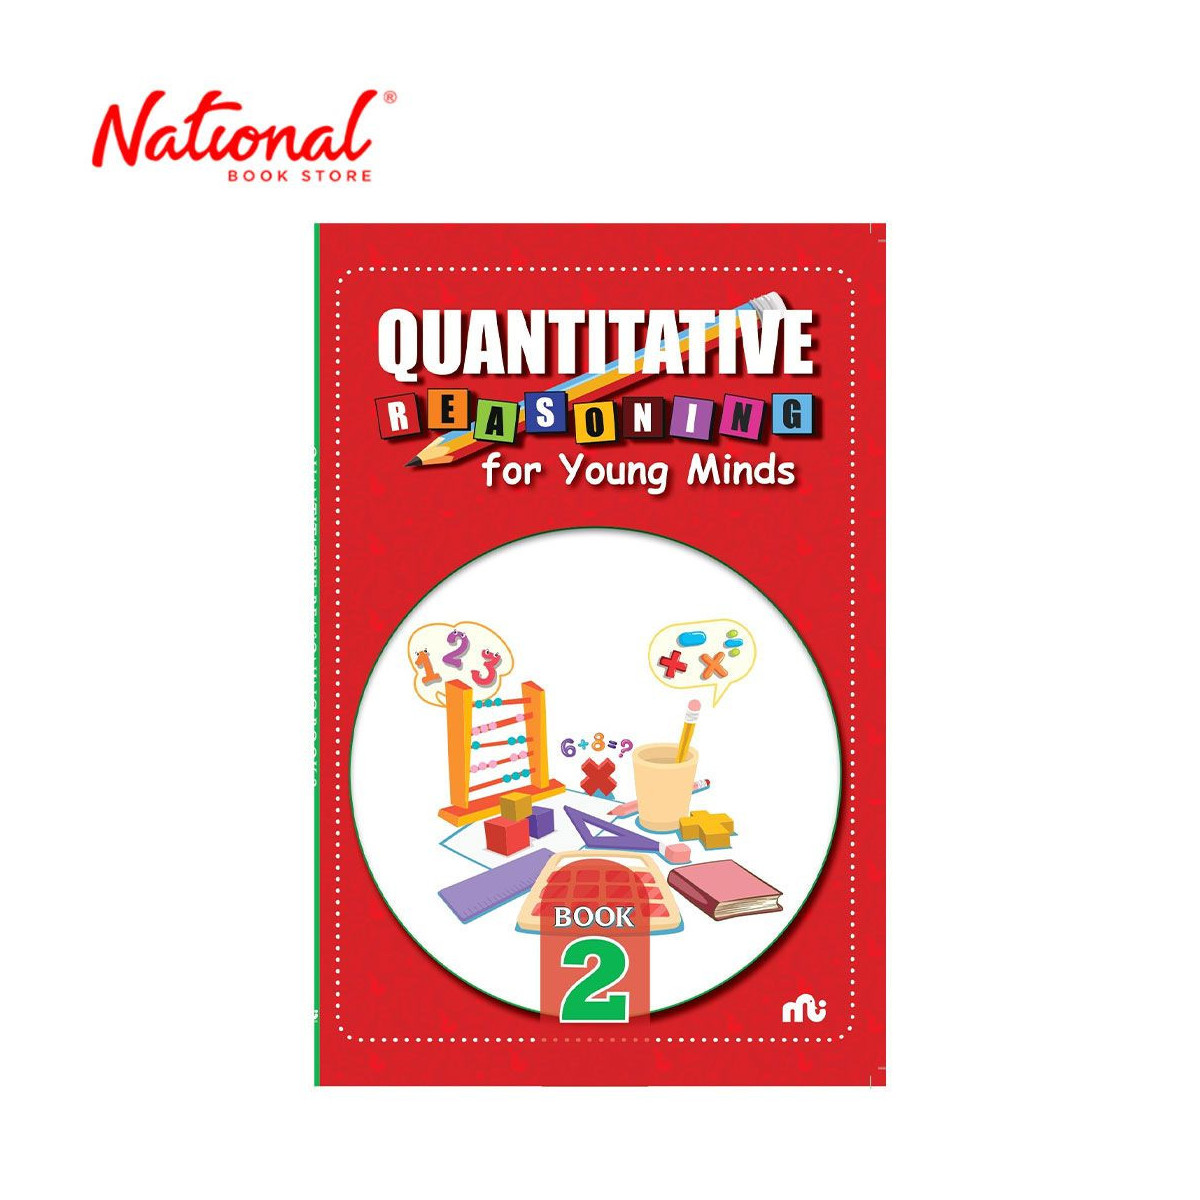 Quantitative Reasoning for Young Minds Book 2 - Trade Paperback - Workbooks for Kids